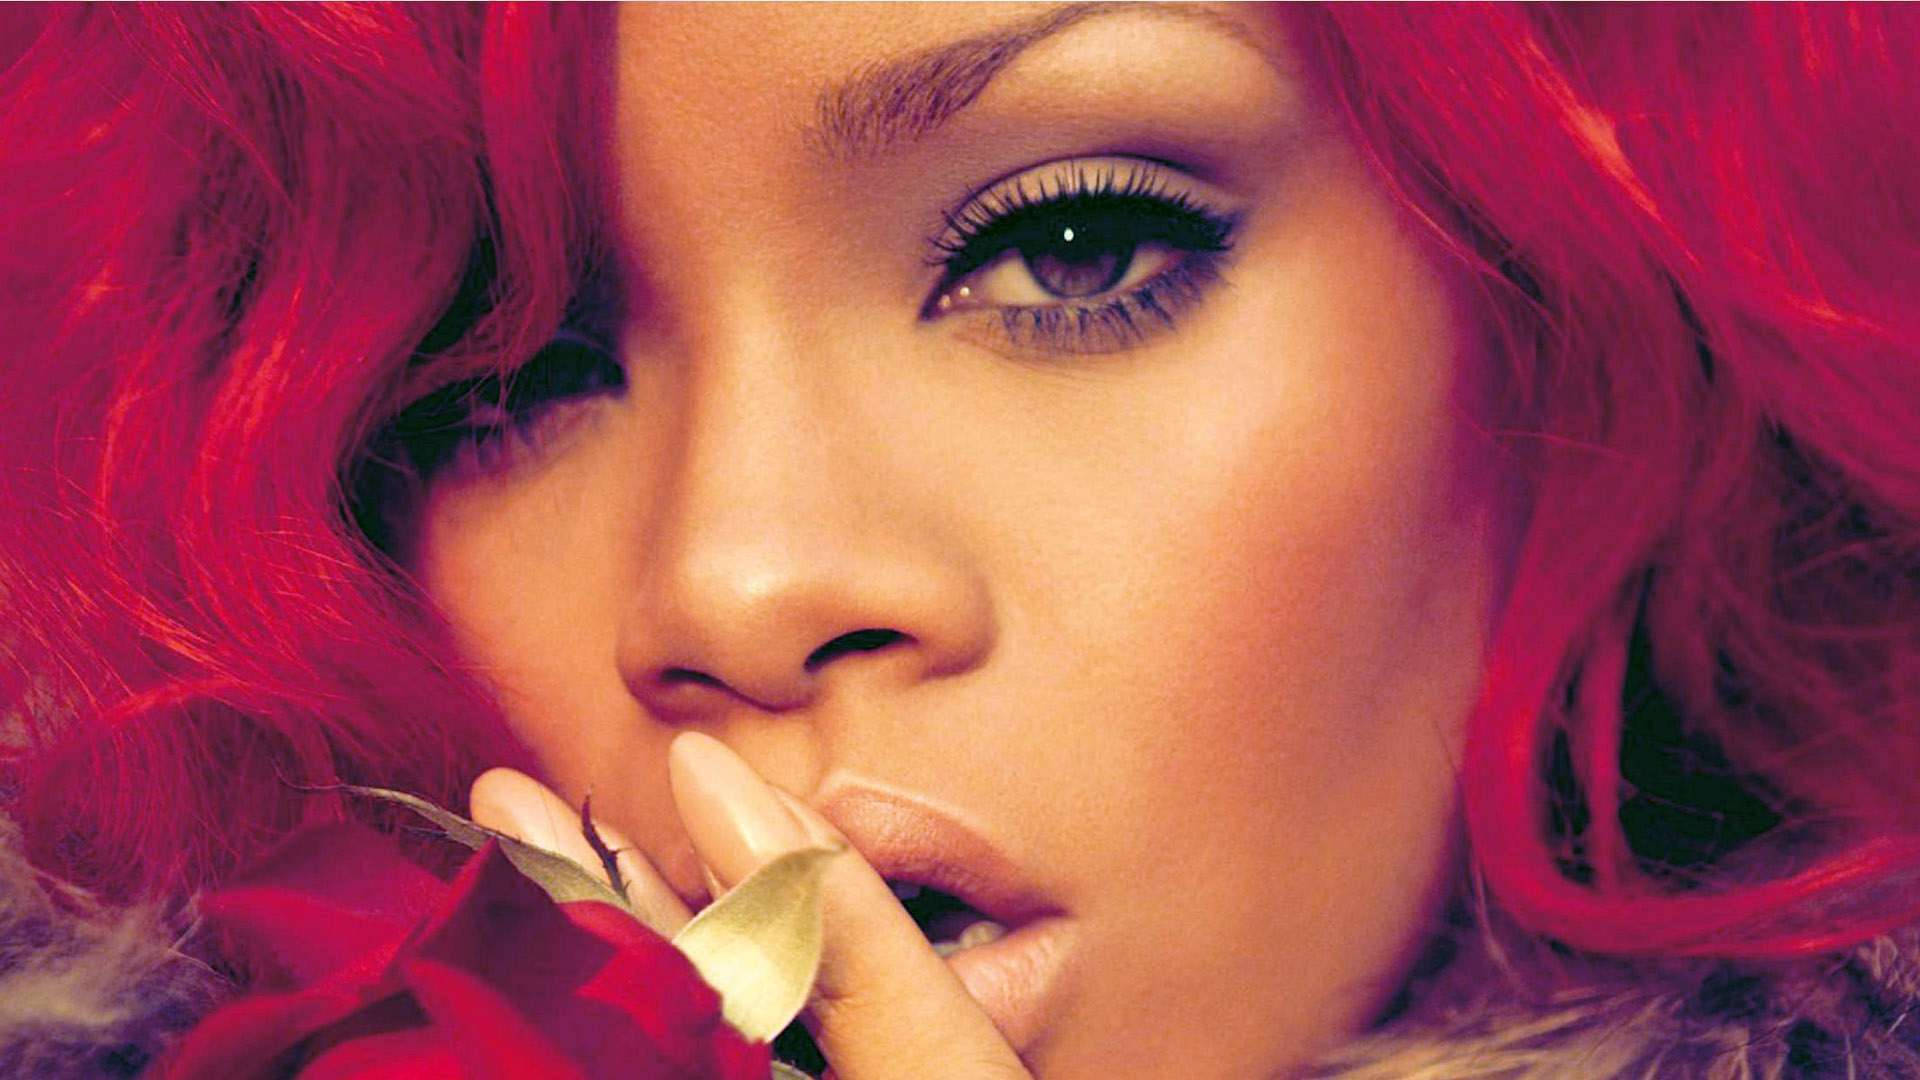 “Rihanna oozing confidence in her signature red locks” Wallpaper